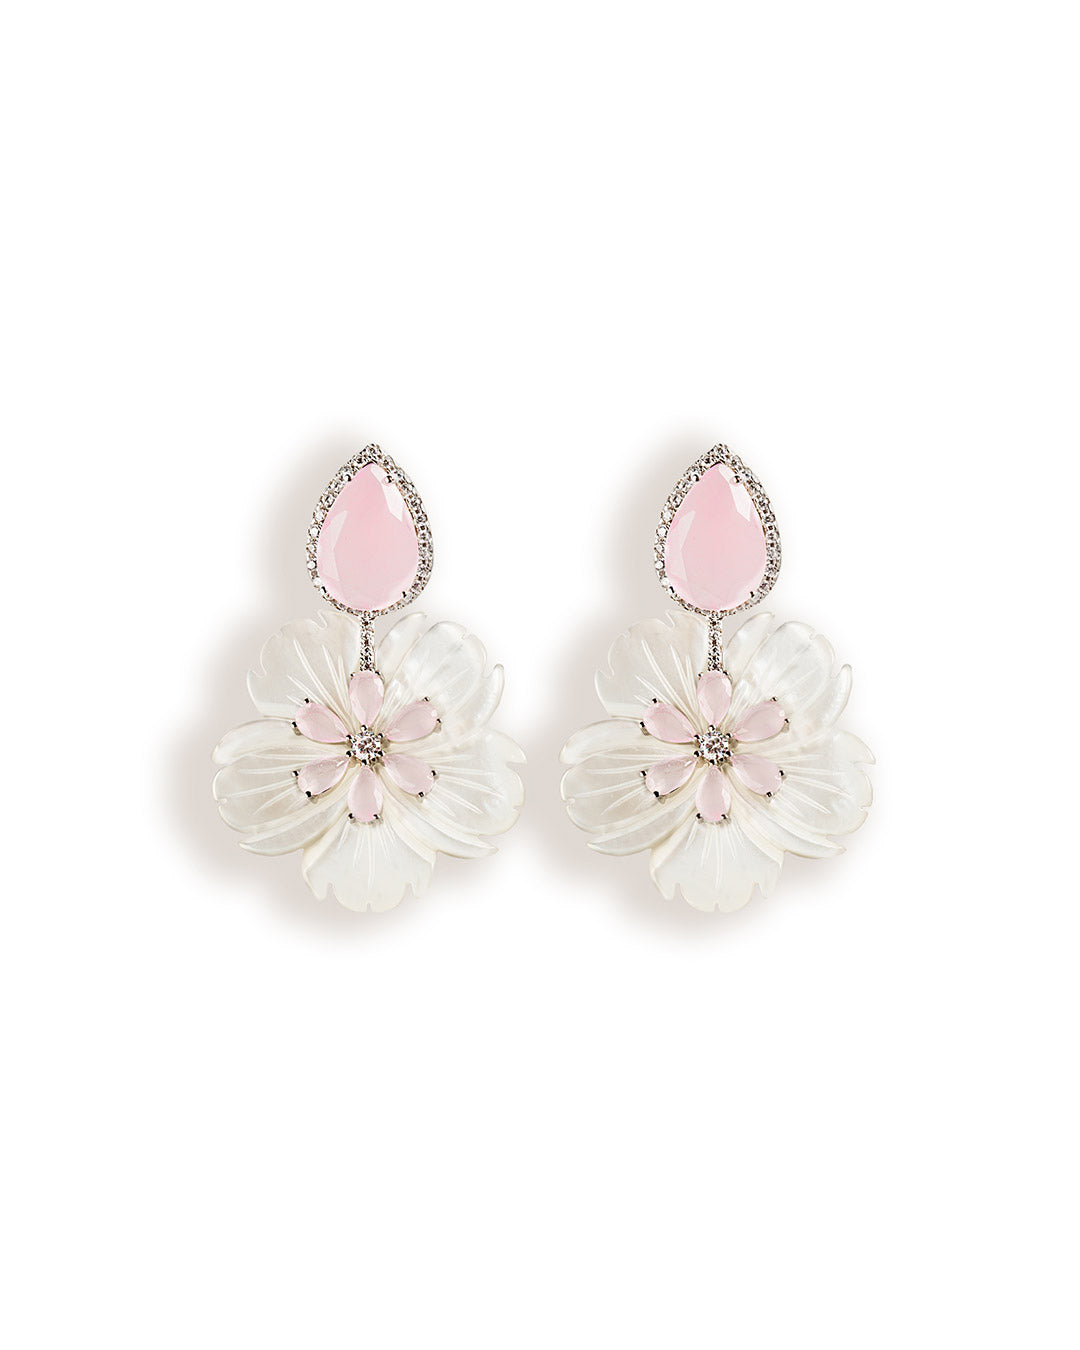 925 SILVER FLOWER EARRINGS WITH MOTHER OF PEARL AND PINK CRYSTALS